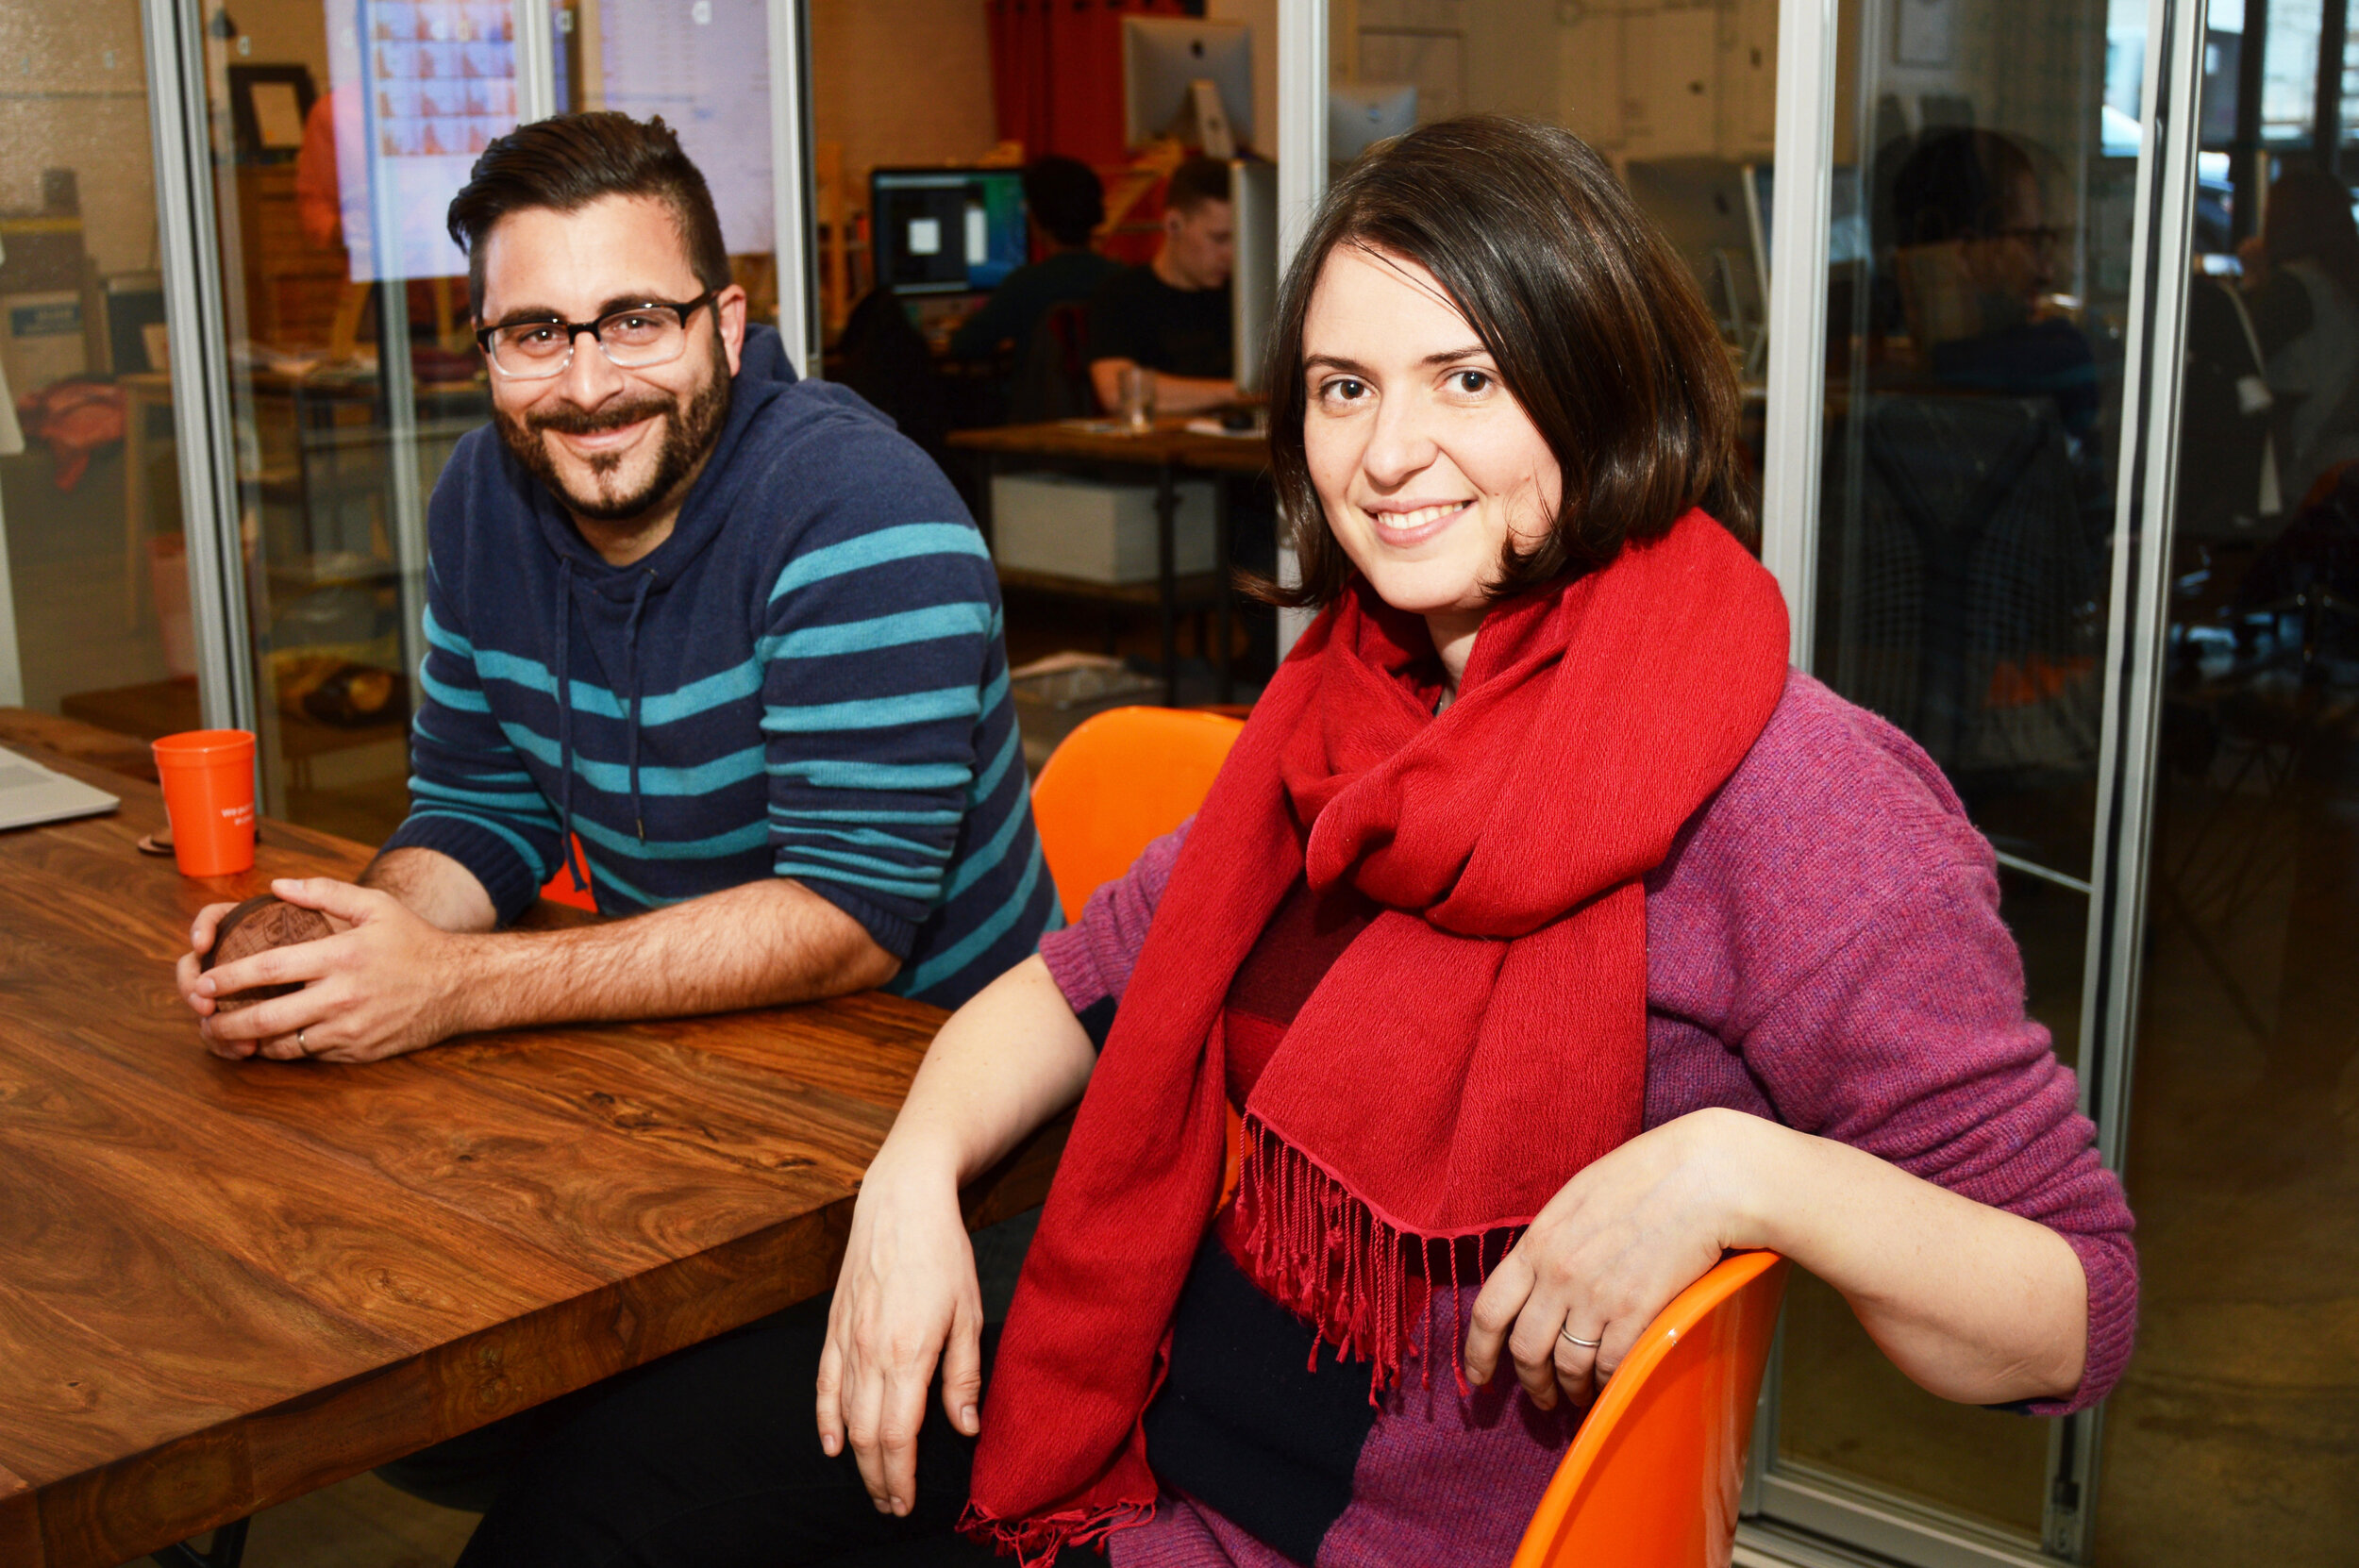  Deroy Peraza and Julia Zeltser are the co-founders of Hyperakt, a social impact design agency. 